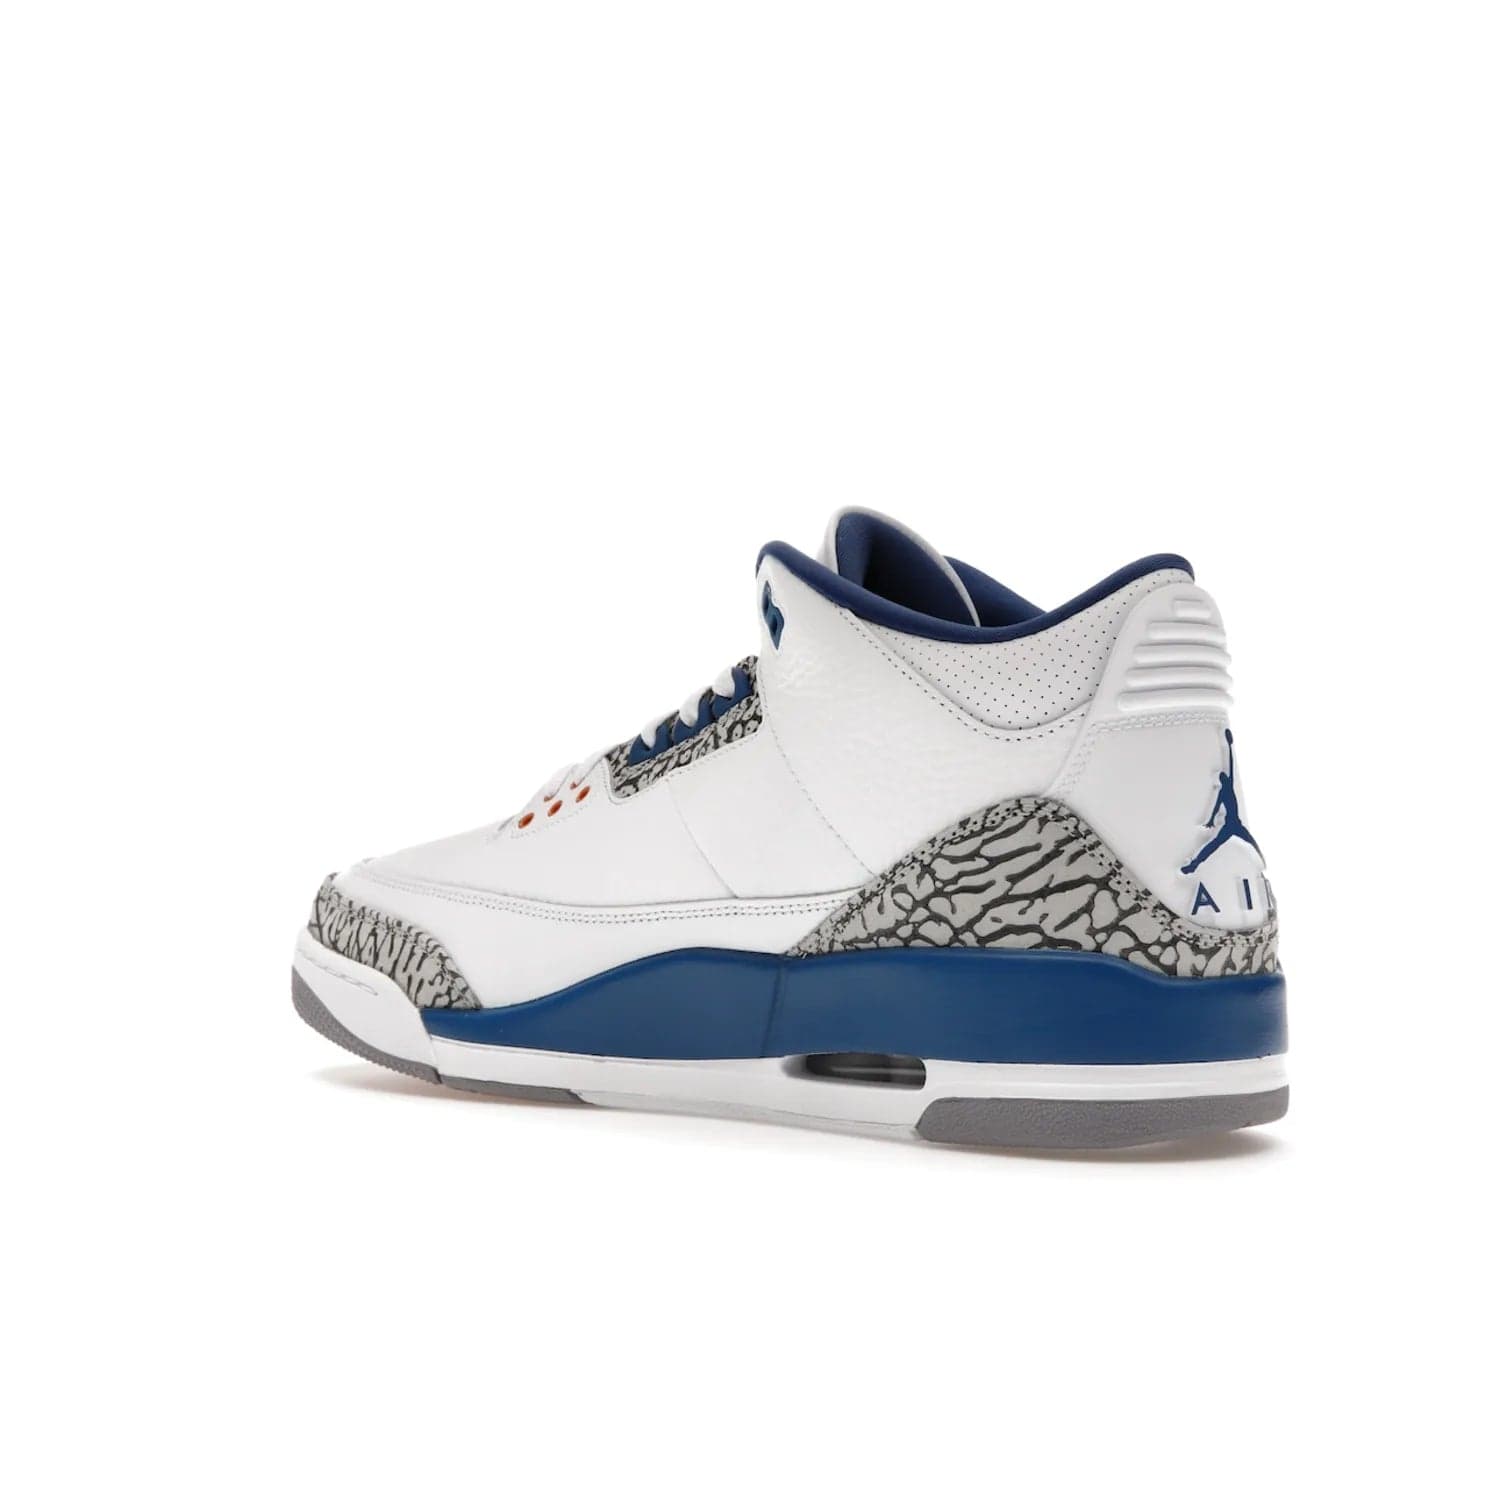 Jordan 3 Retro Wizards - Image 23 - Only at www.BallersClubKickz.com - ##
Special tribute sneaker from Jordan Brand to Michael Jordan's time with the Washington Wizards. Iconic white upper, orange Jumpman logo, blue accents, metallic copper details, and cement grey outsole. Buy the Air Jordan 3 Retro Wizards April 29, 2023.